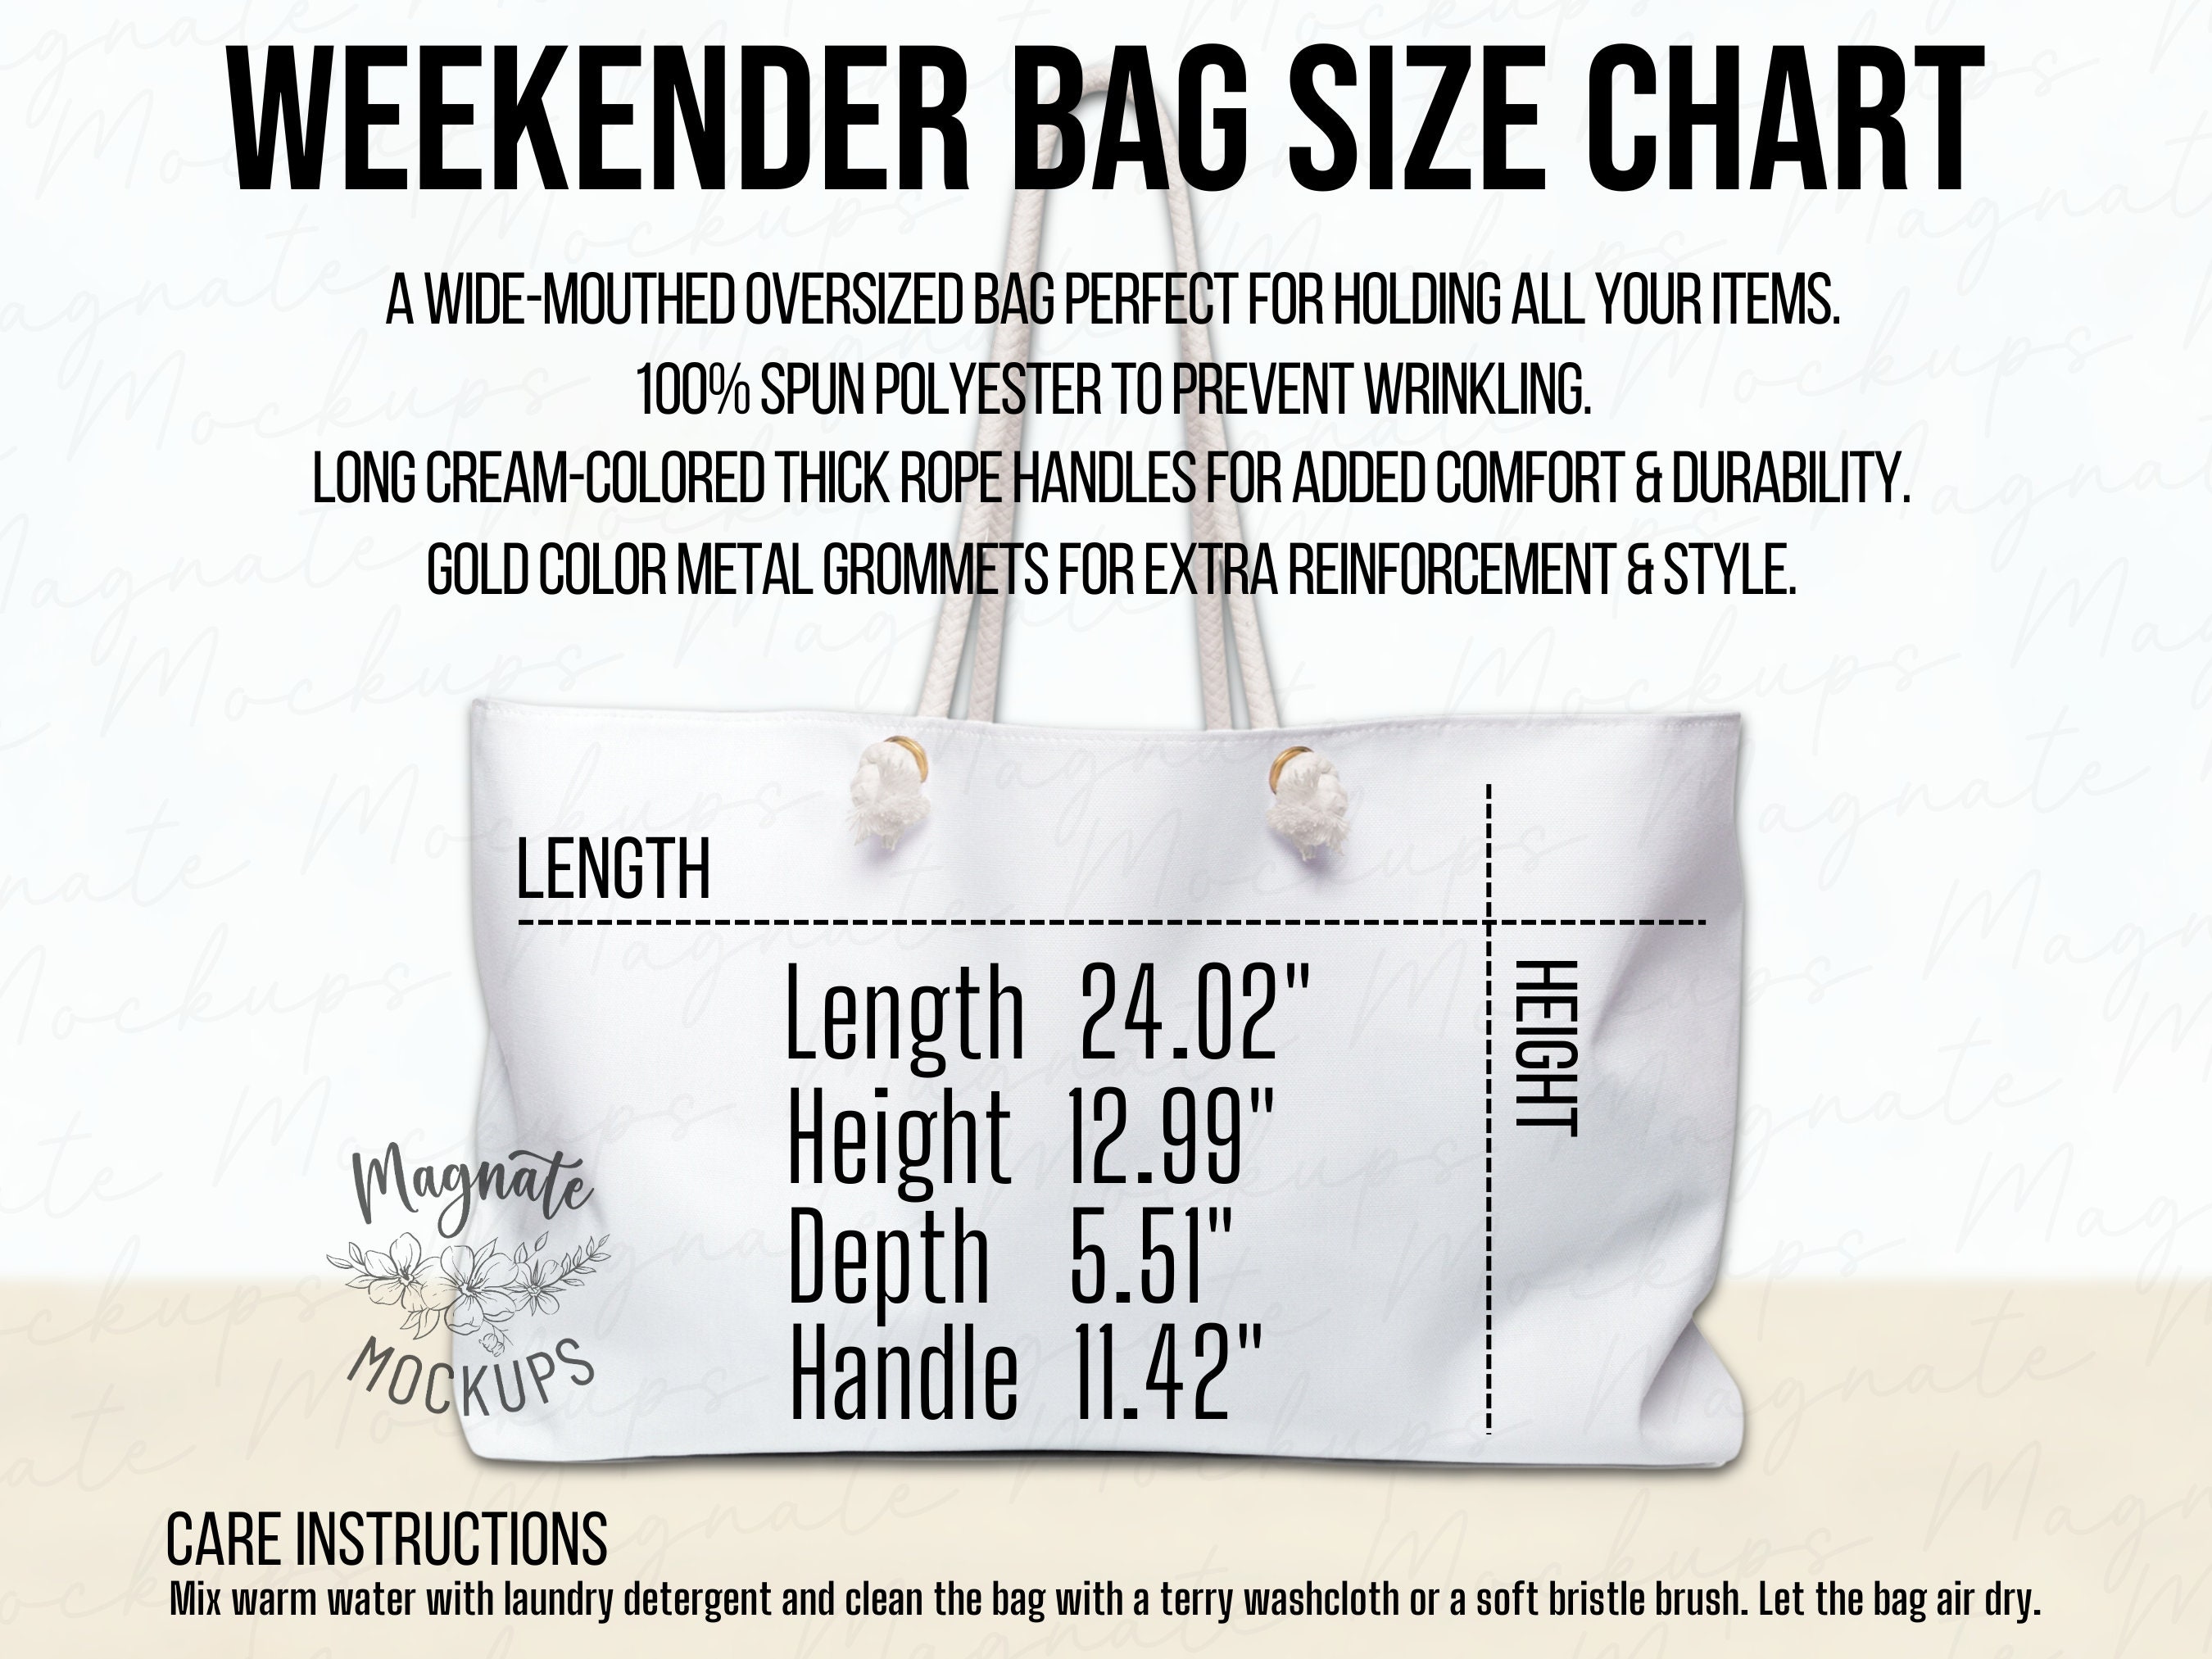 The Vibrant Boho Weekender Bag – The Feathered Filly